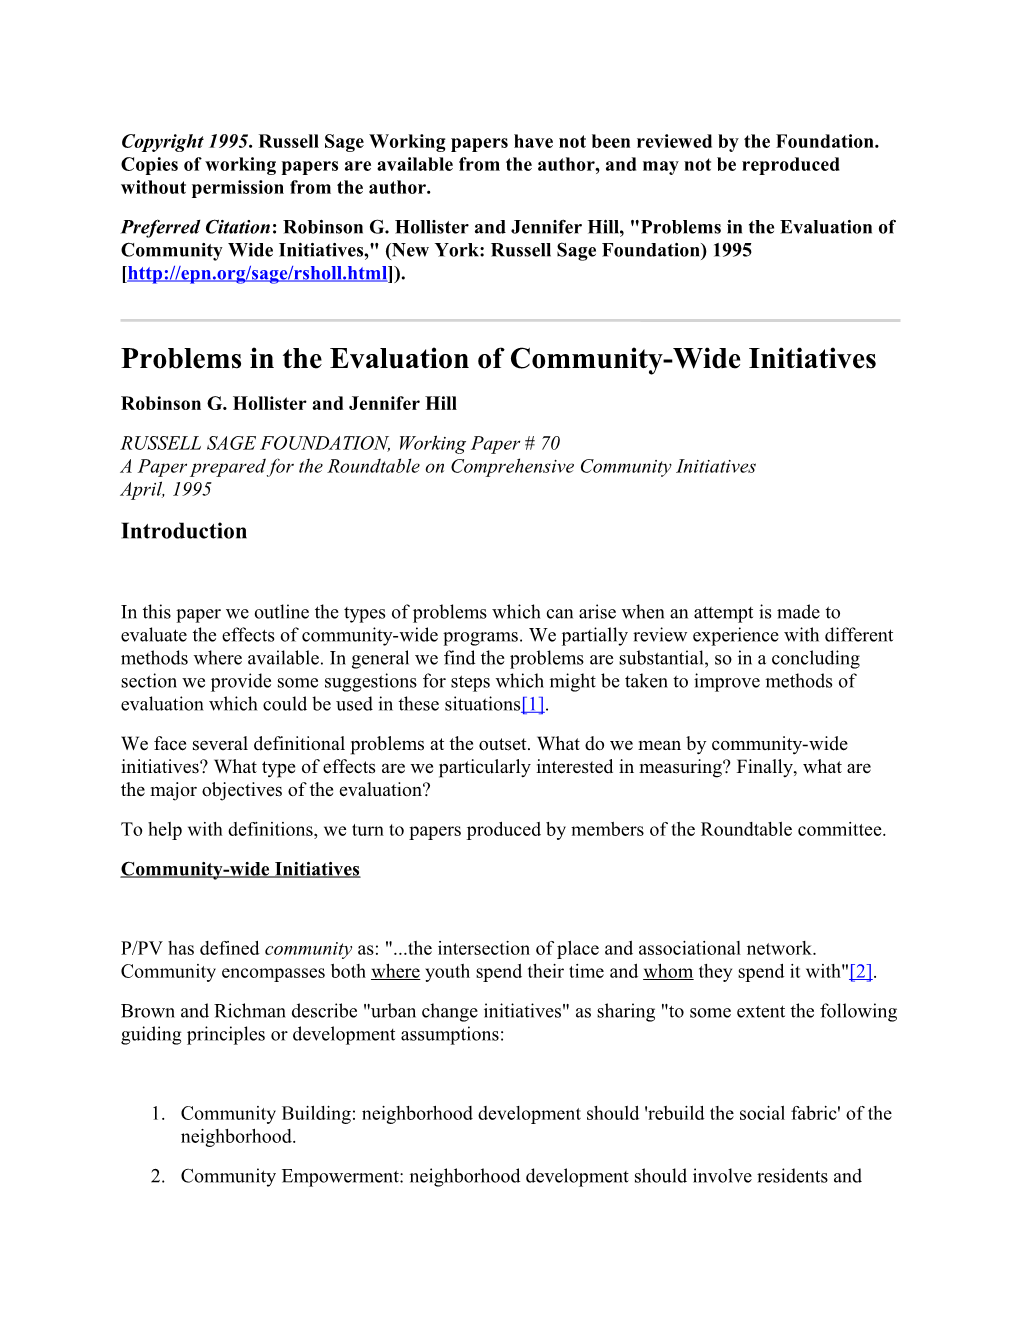 Problems in the Evaluation of Community-Wide Initiatives